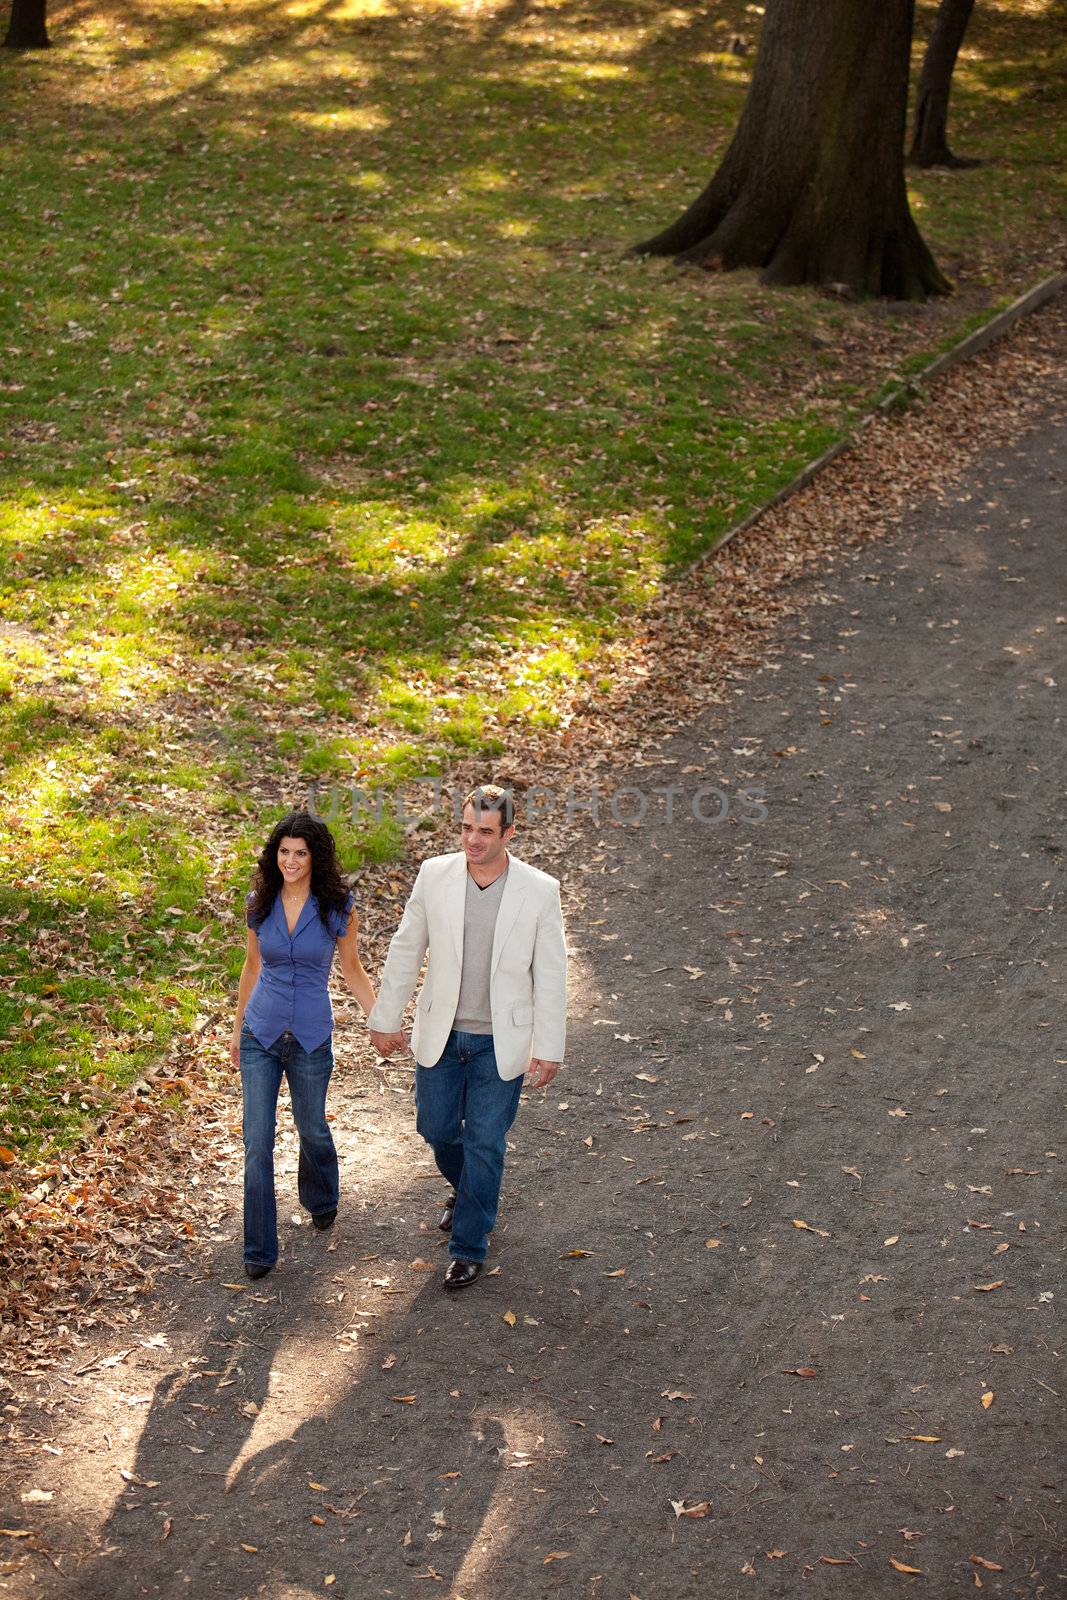 A man and woman walking in a park on a sunny day